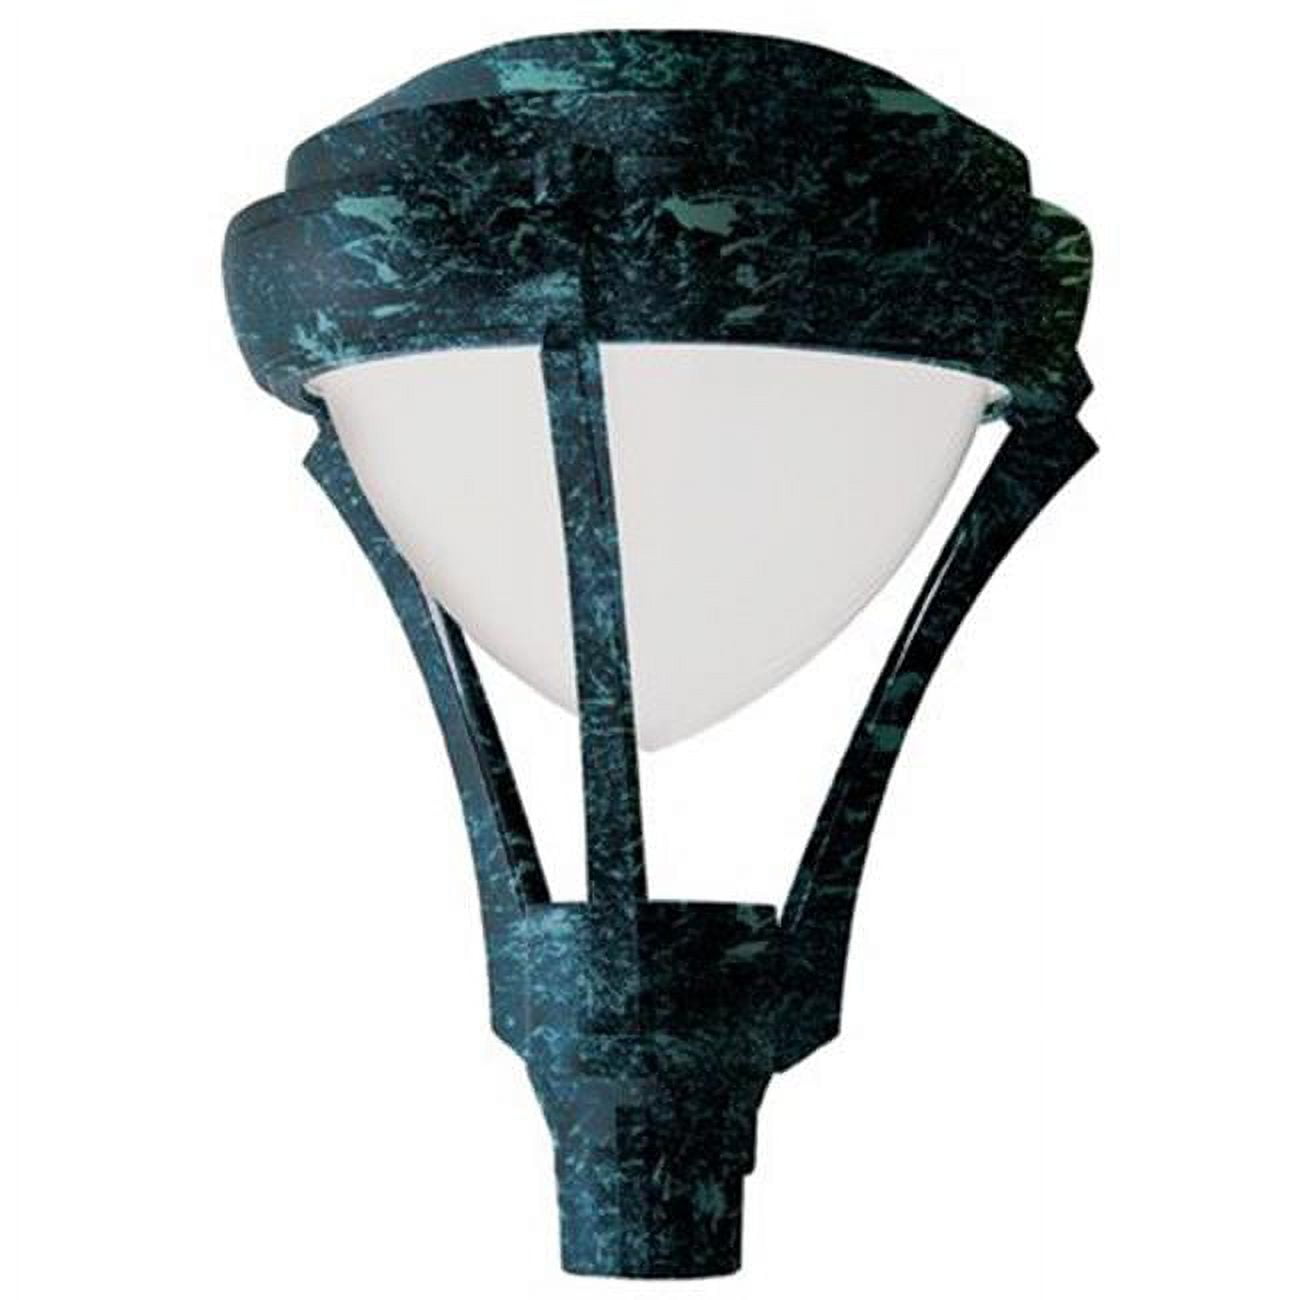 Picture of Dabmar Lighting GM594-VG-MT 150W Powder Coated Cast Aluminum Post Top Light Fixture with High Pressure Sodium Lamp, Verde Green